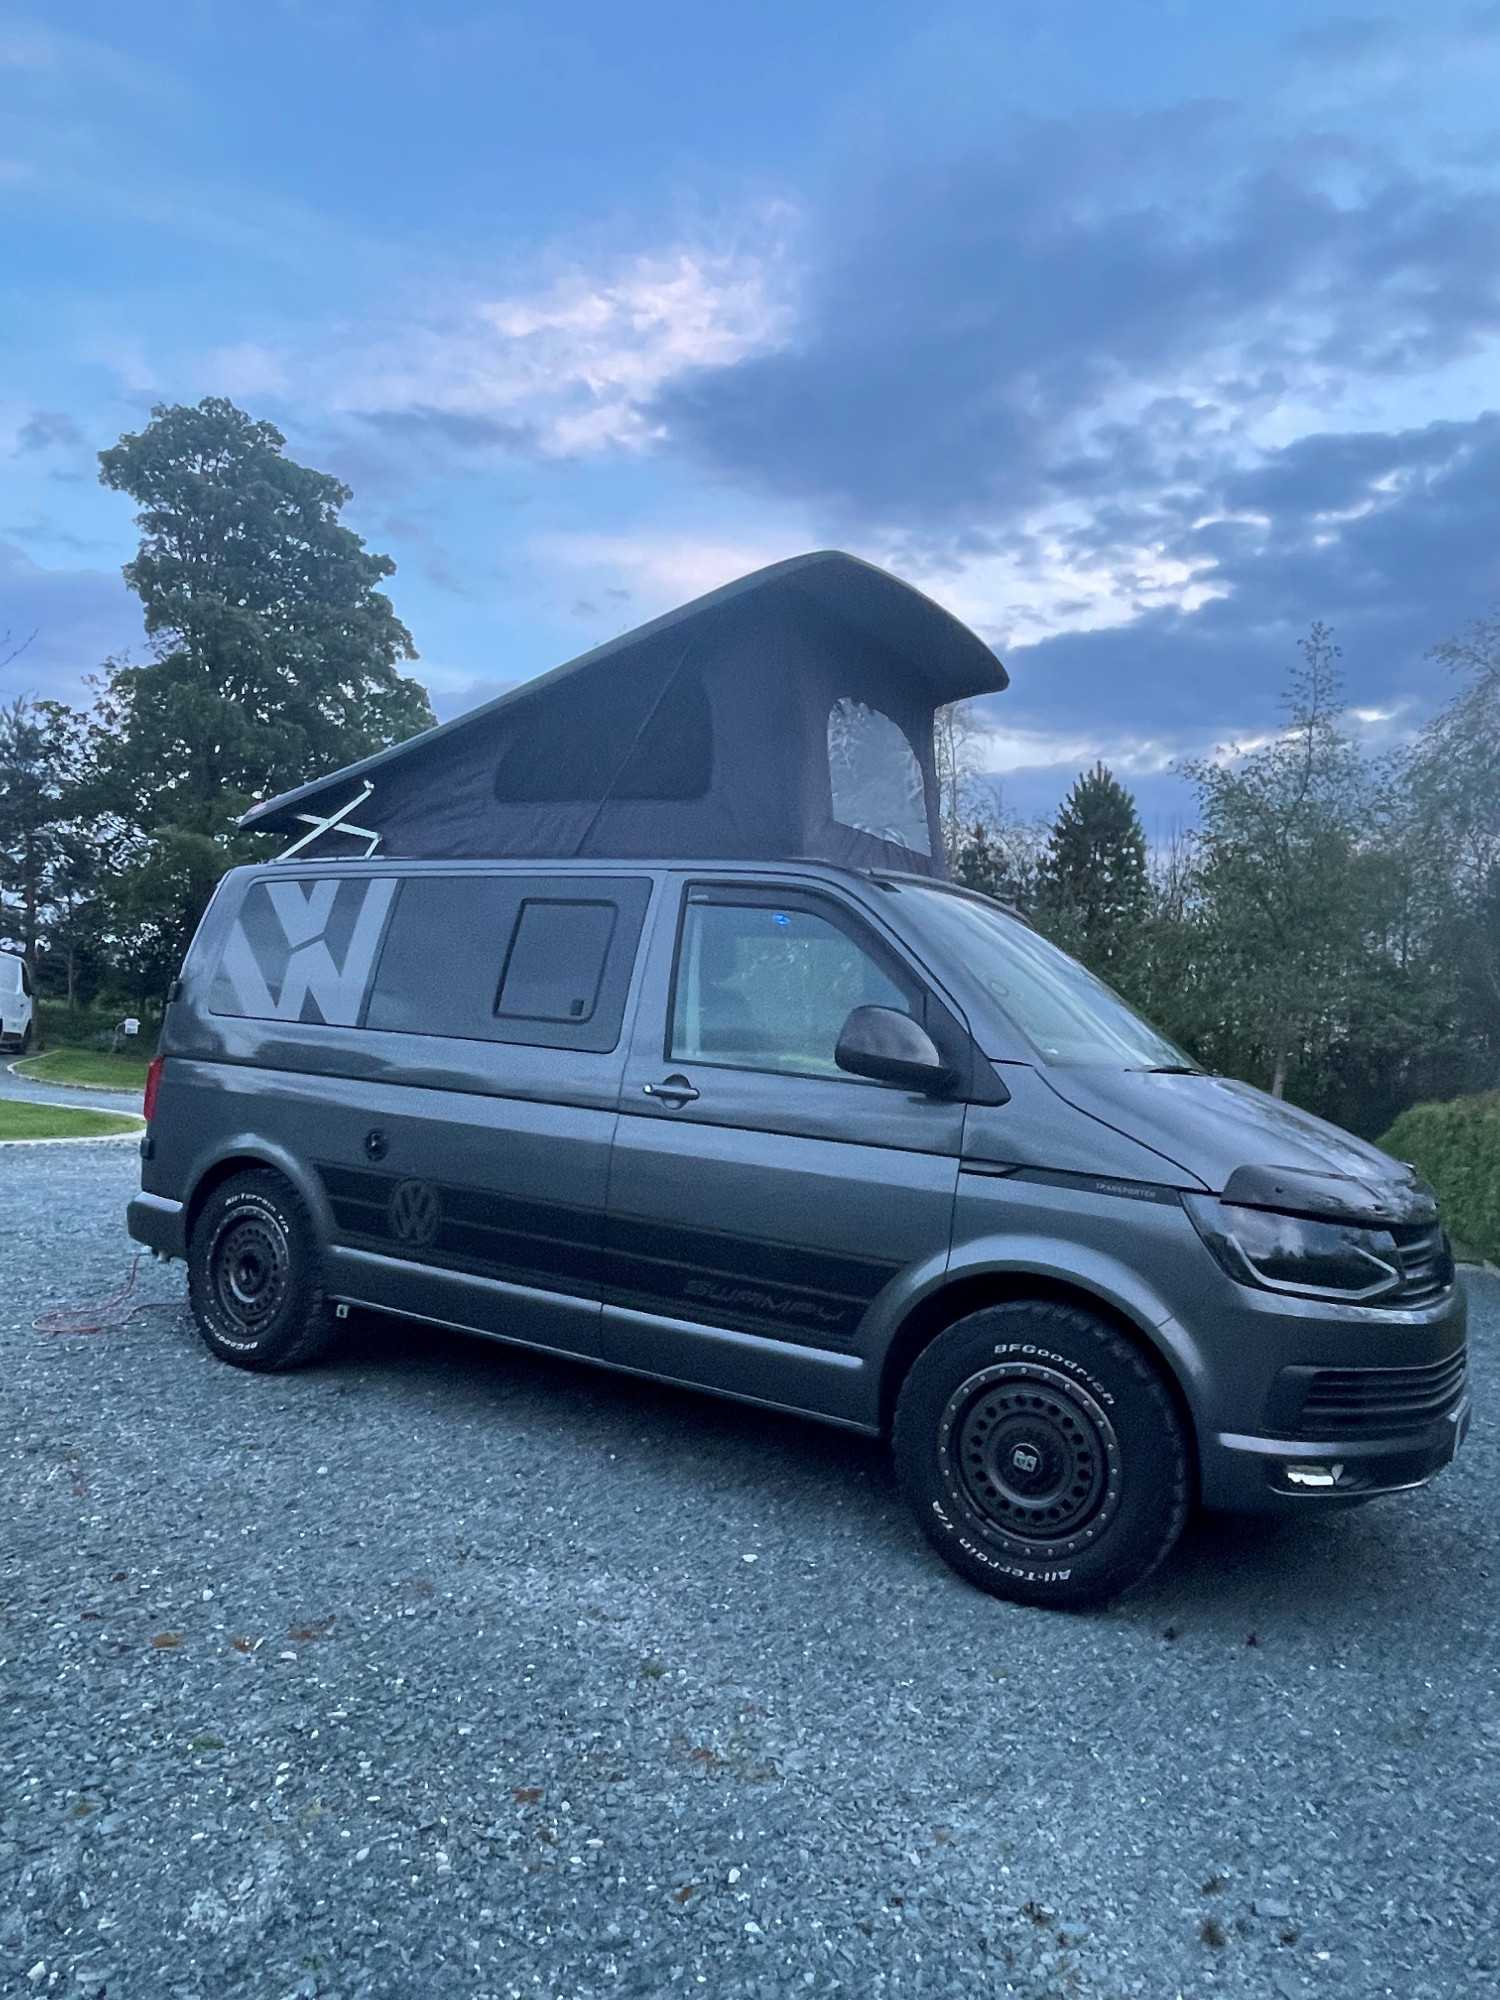 A VW T6 Campervan called Swampy and for hire in Mossley, Lancashire